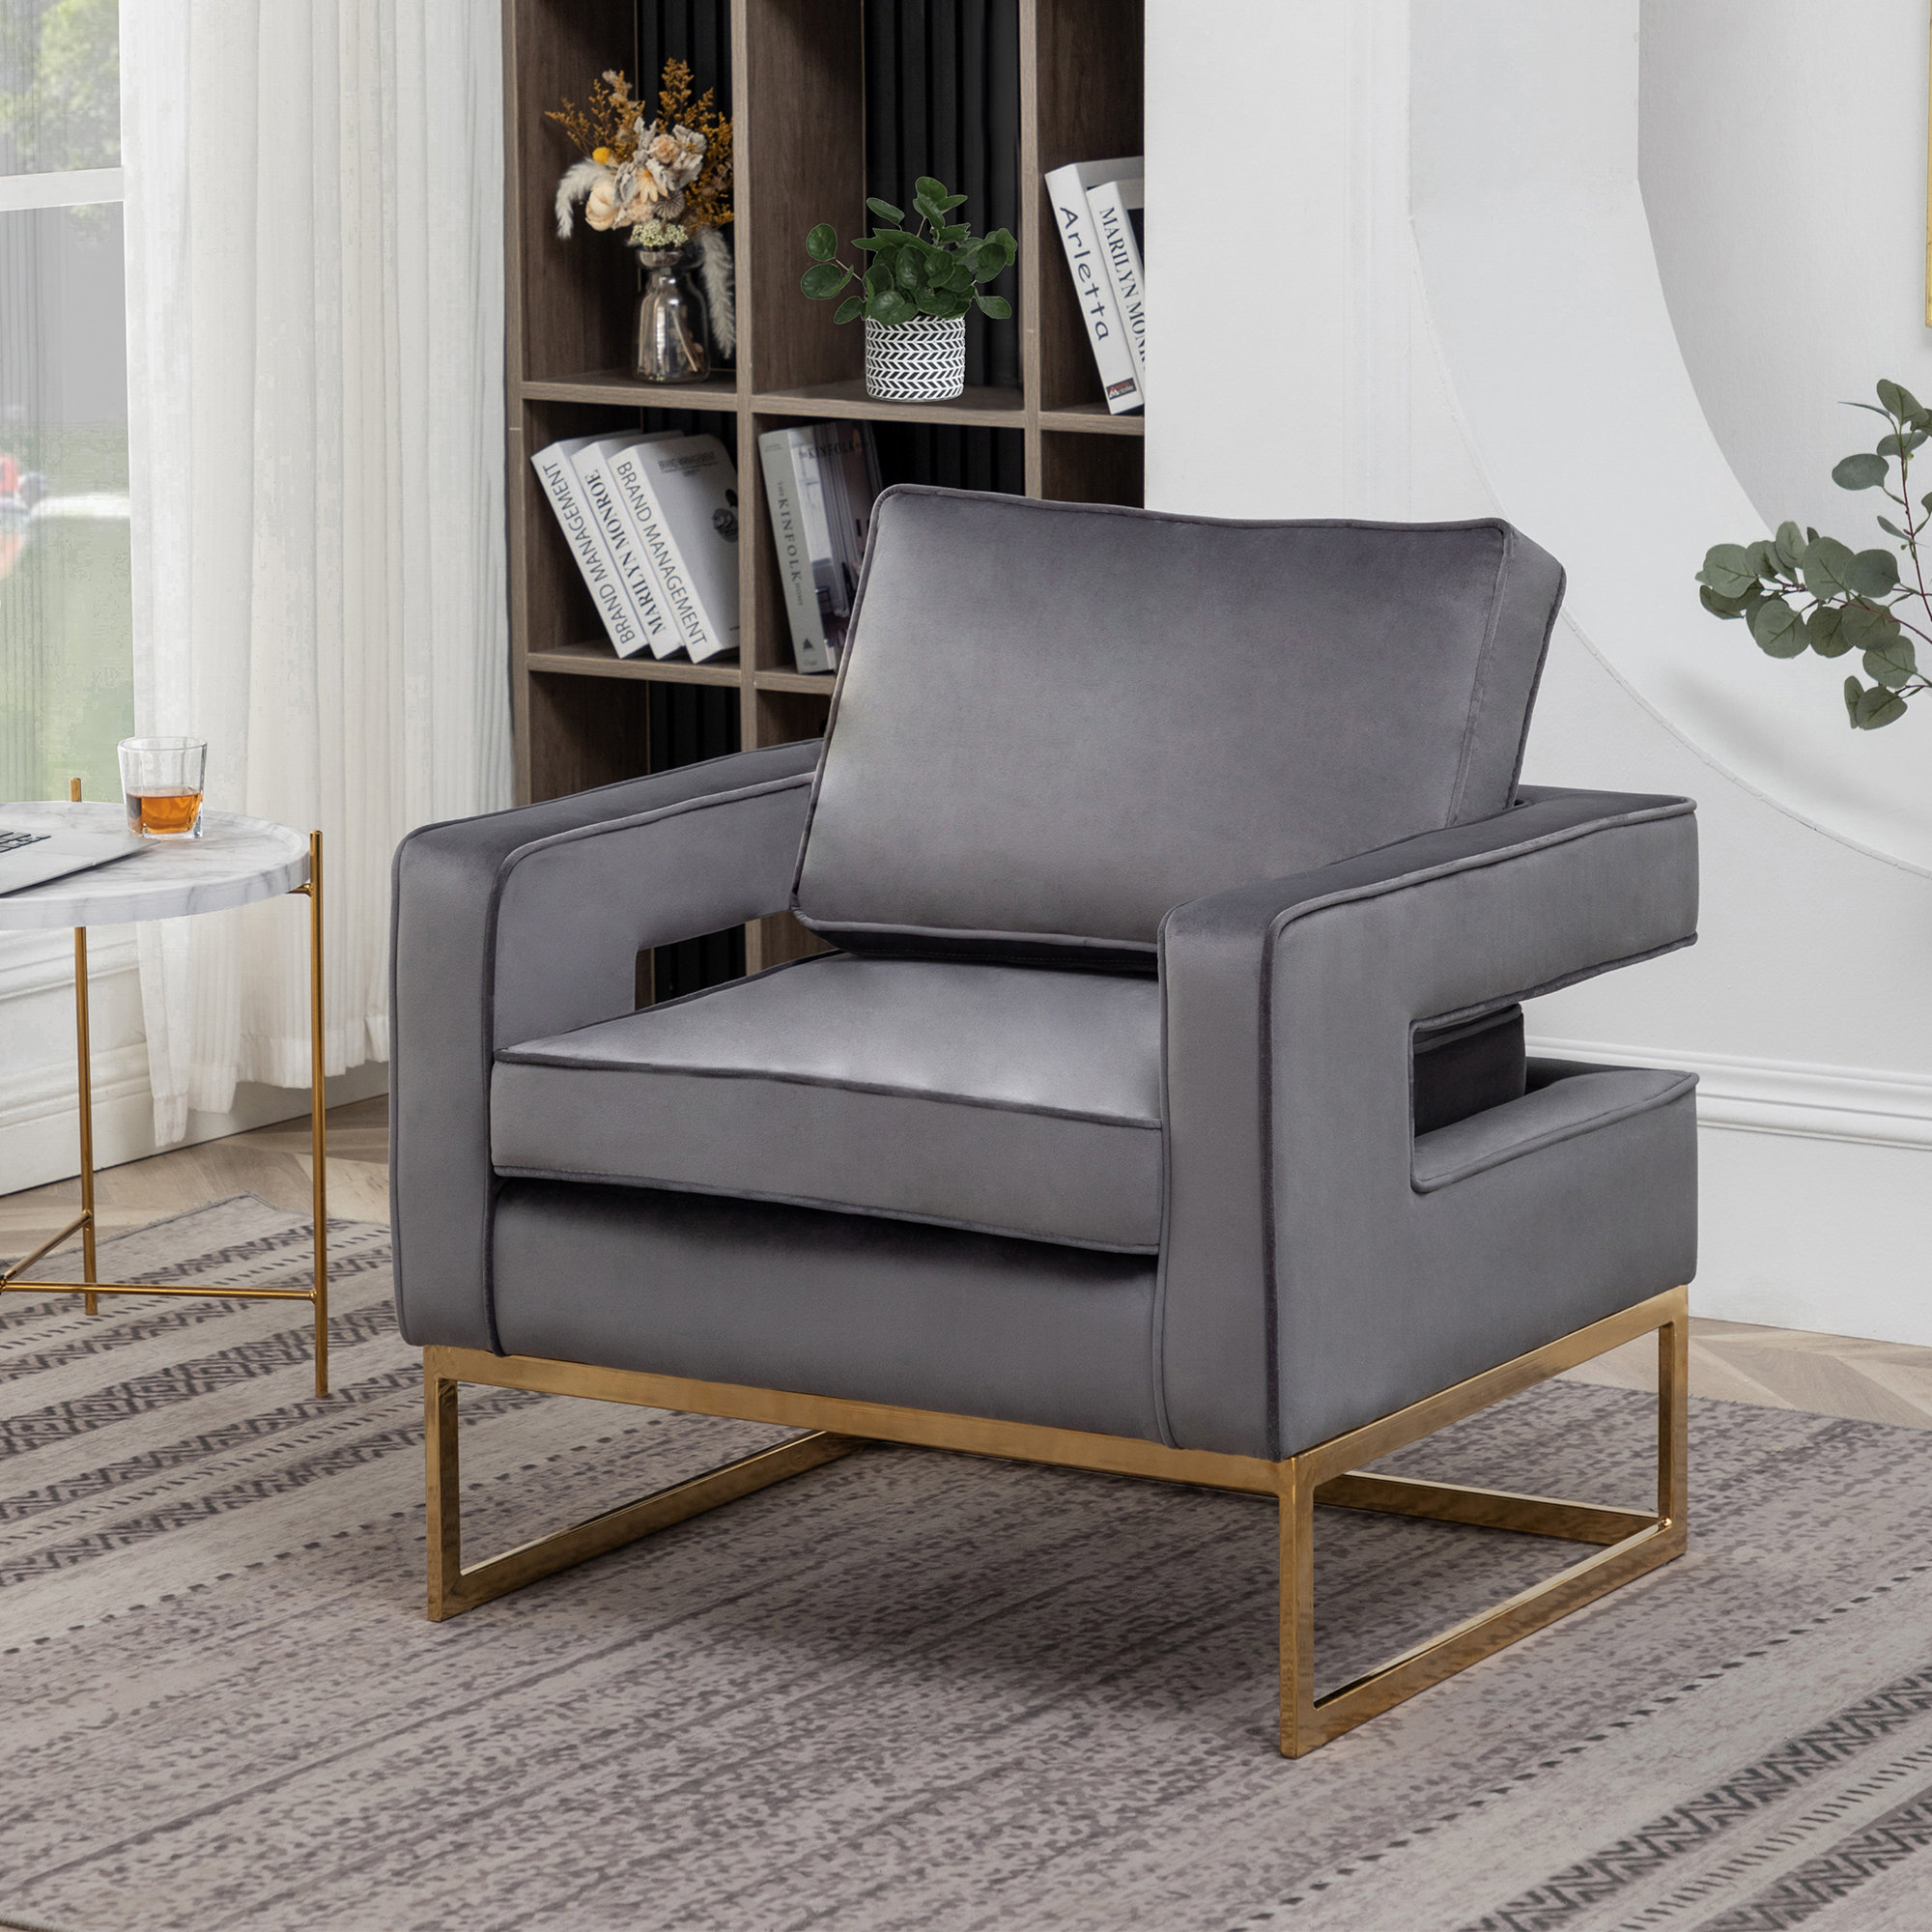 Everly Quinn Studio Modern Luxe and Glam Navy Blue Velvet Fabric Upholstered and Gold Finished Metal Armchair Everly Quinn Fabric: Blue Velvet